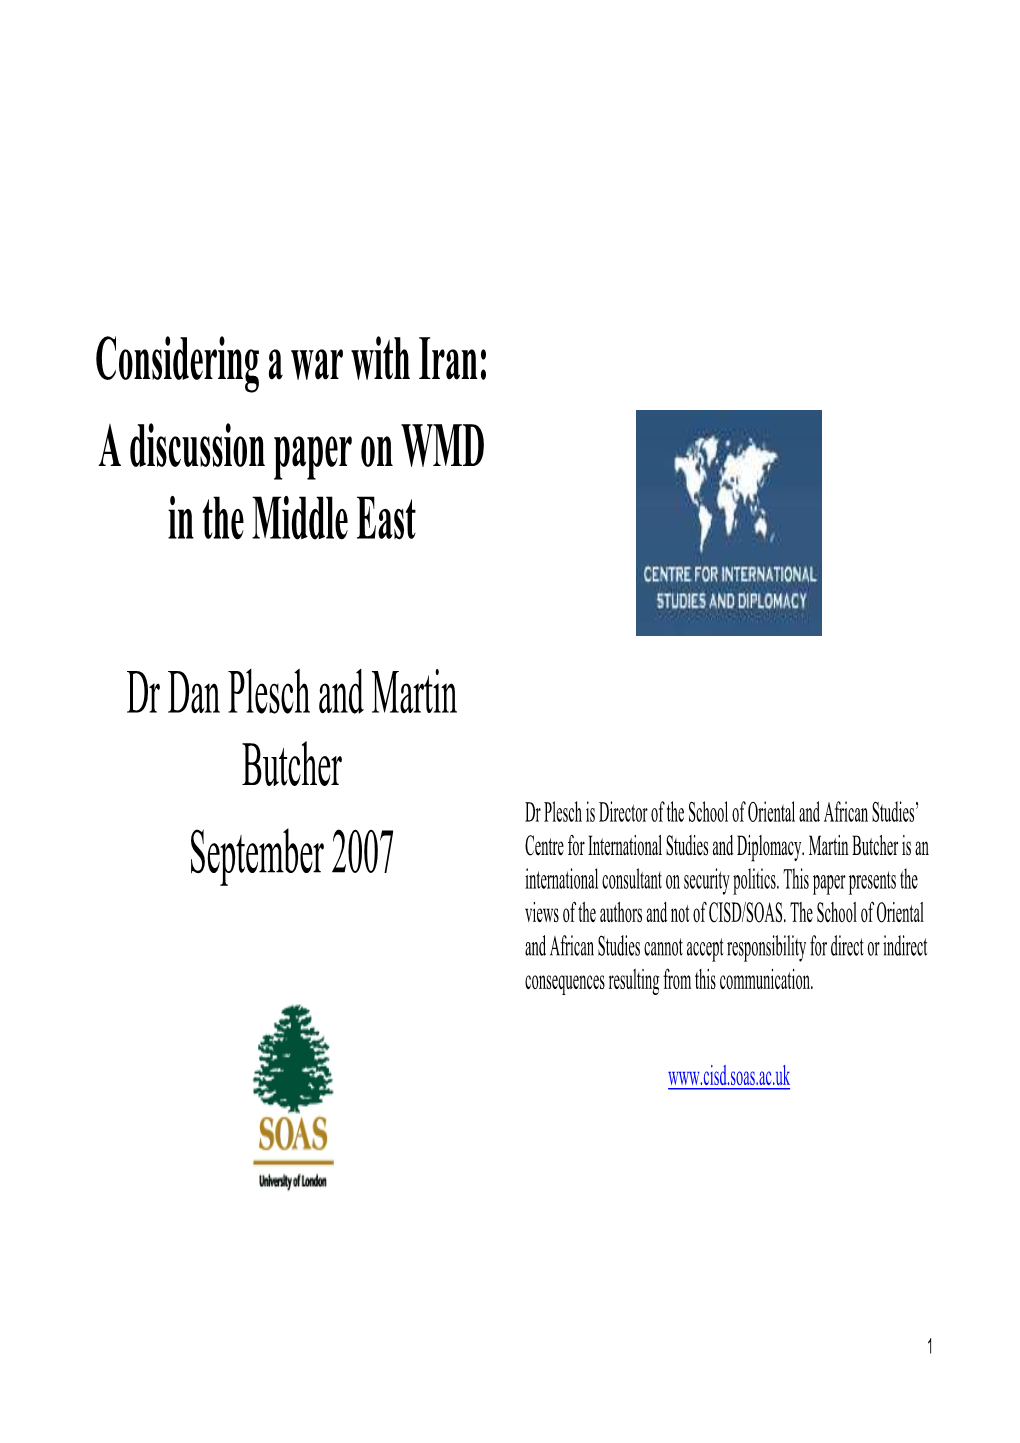 Considering a War with Iran: a Discussion Paper on WMD in the Middle East